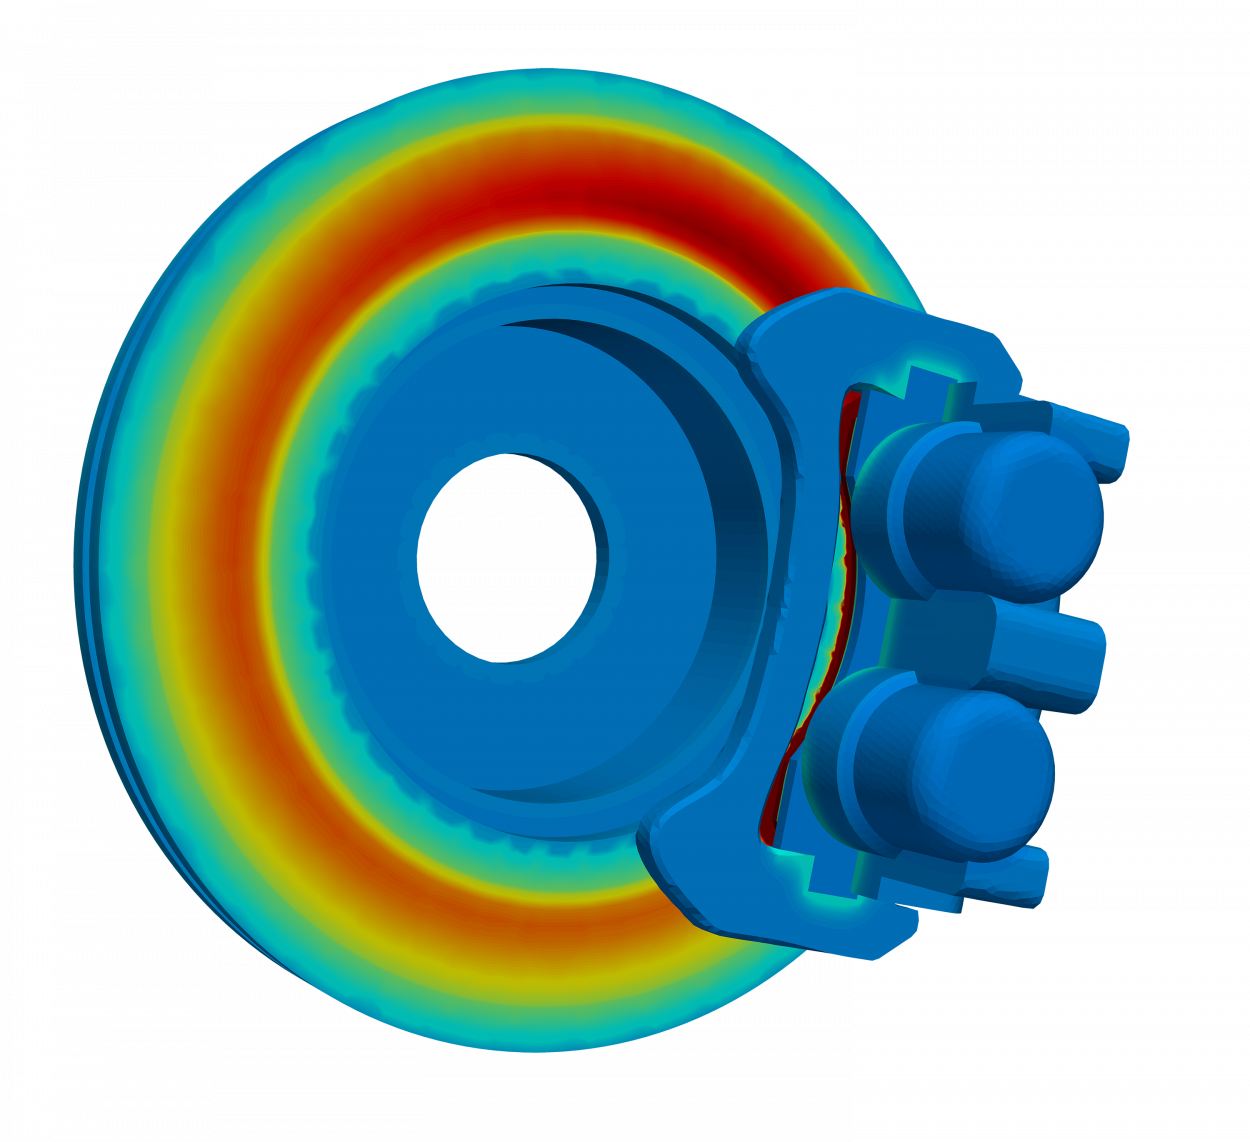 thermal simulation of brake disc and caliper showing heat generation from friction